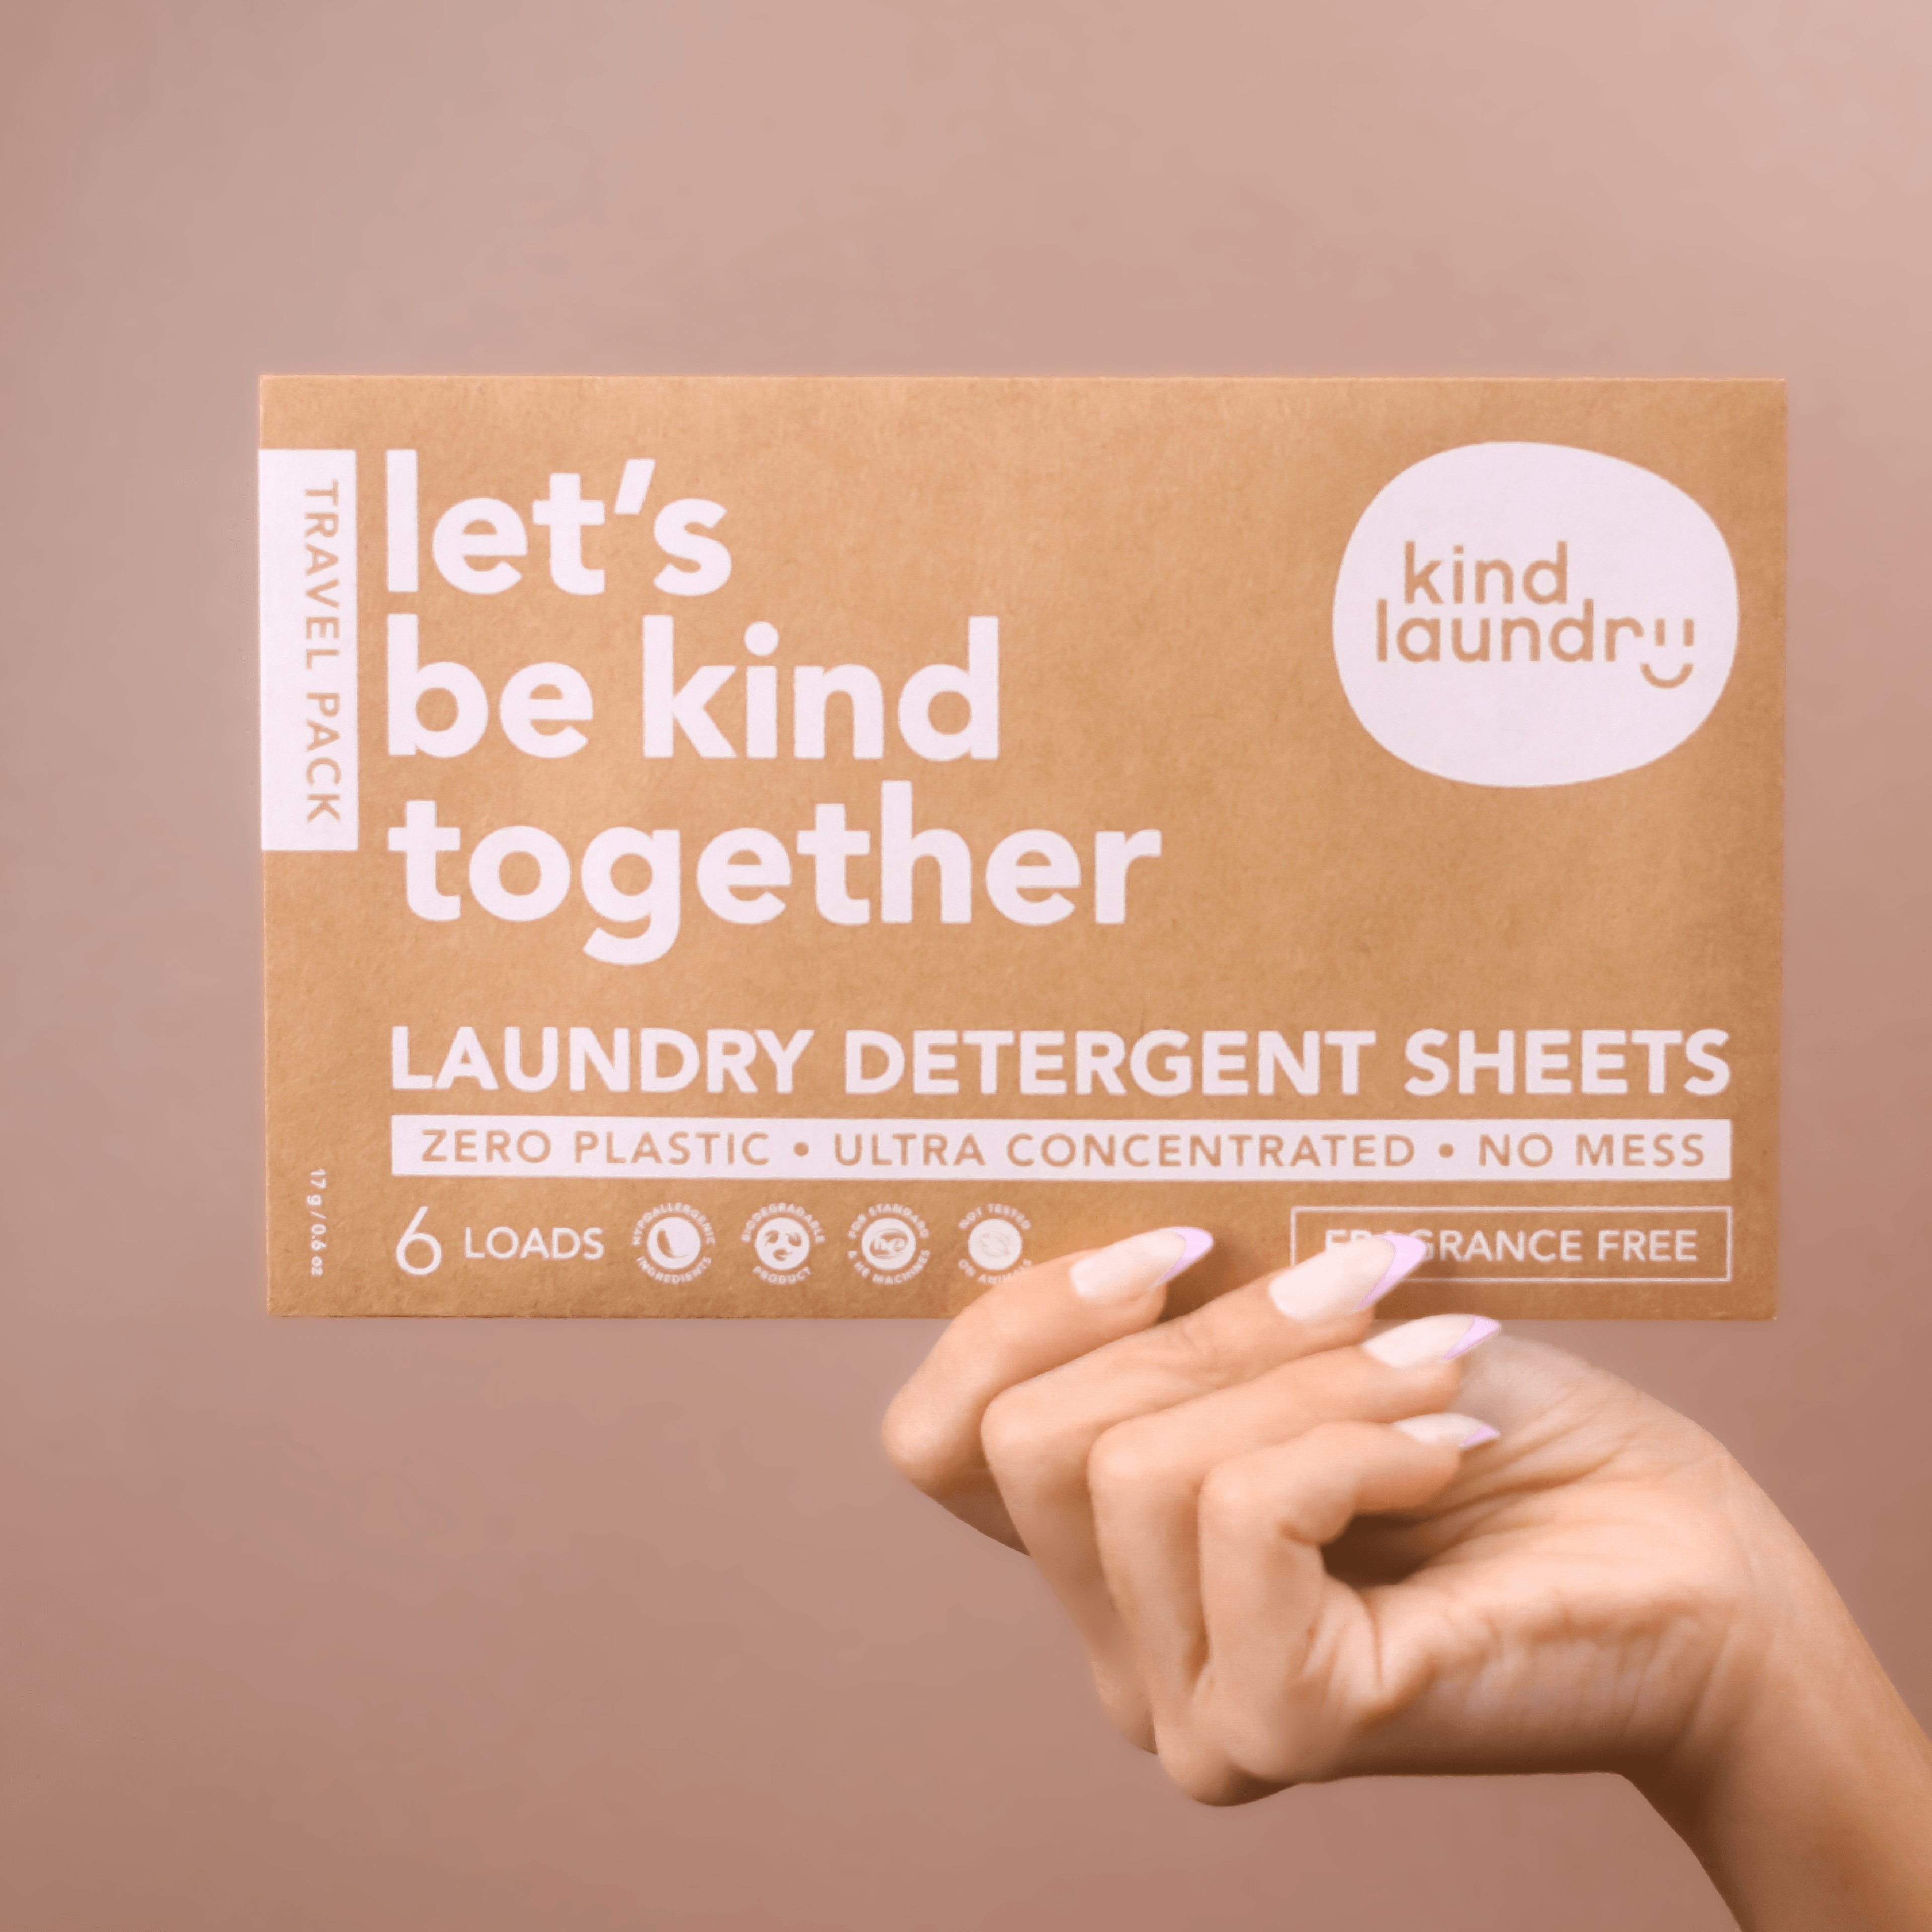 Laundry Soap Sheets (Travel Size) - Fragrance Free (6 Sheets)